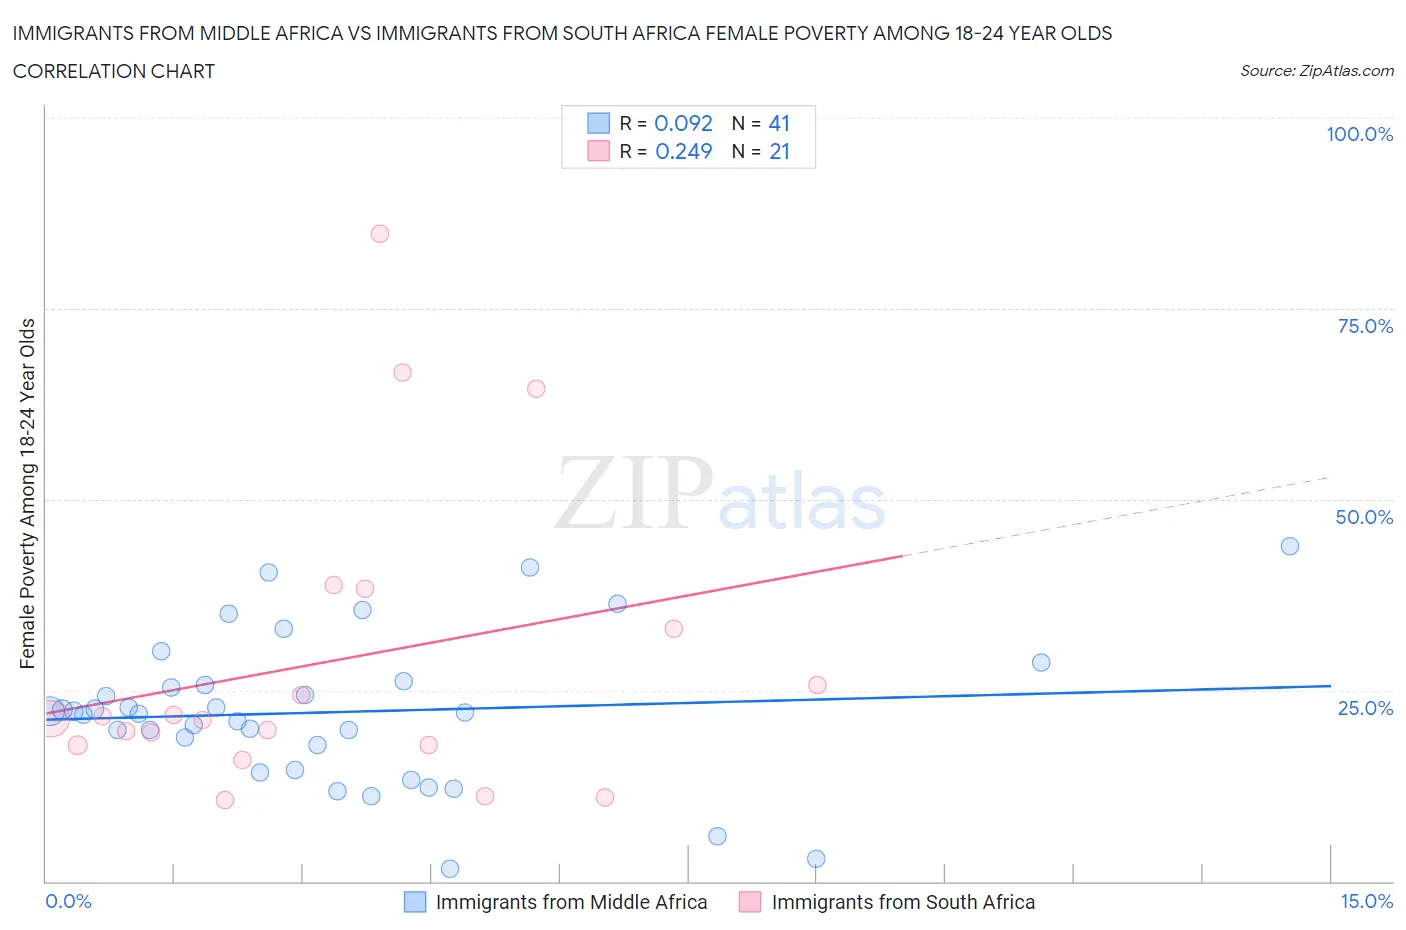 Immigrants from Middle Africa vs Immigrants from South Africa Female Poverty Among 18-24 Year Olds